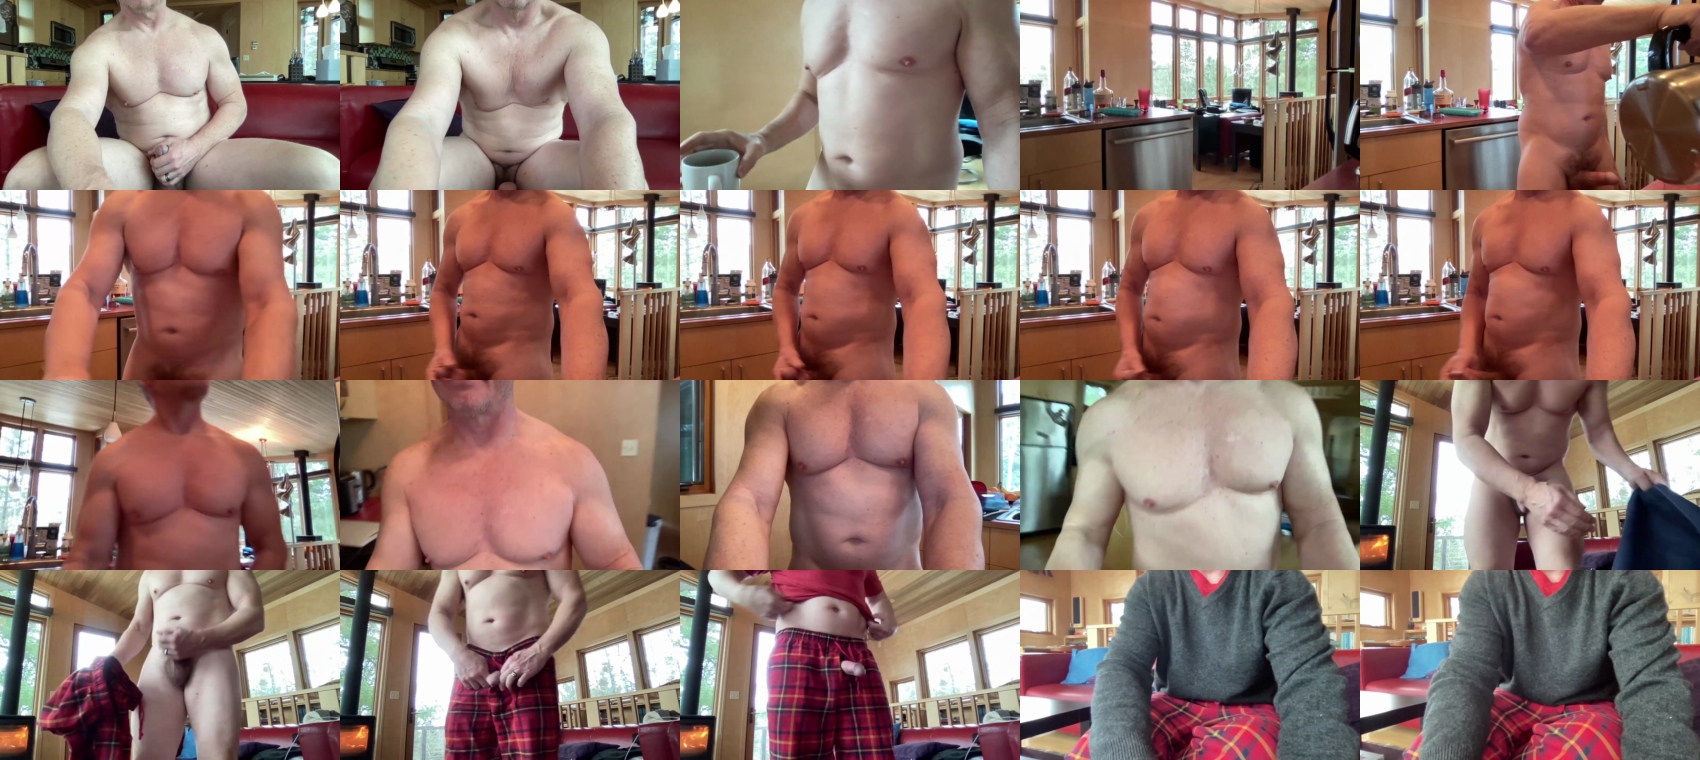 fitdaddy1960  17-03-2022 video Ass